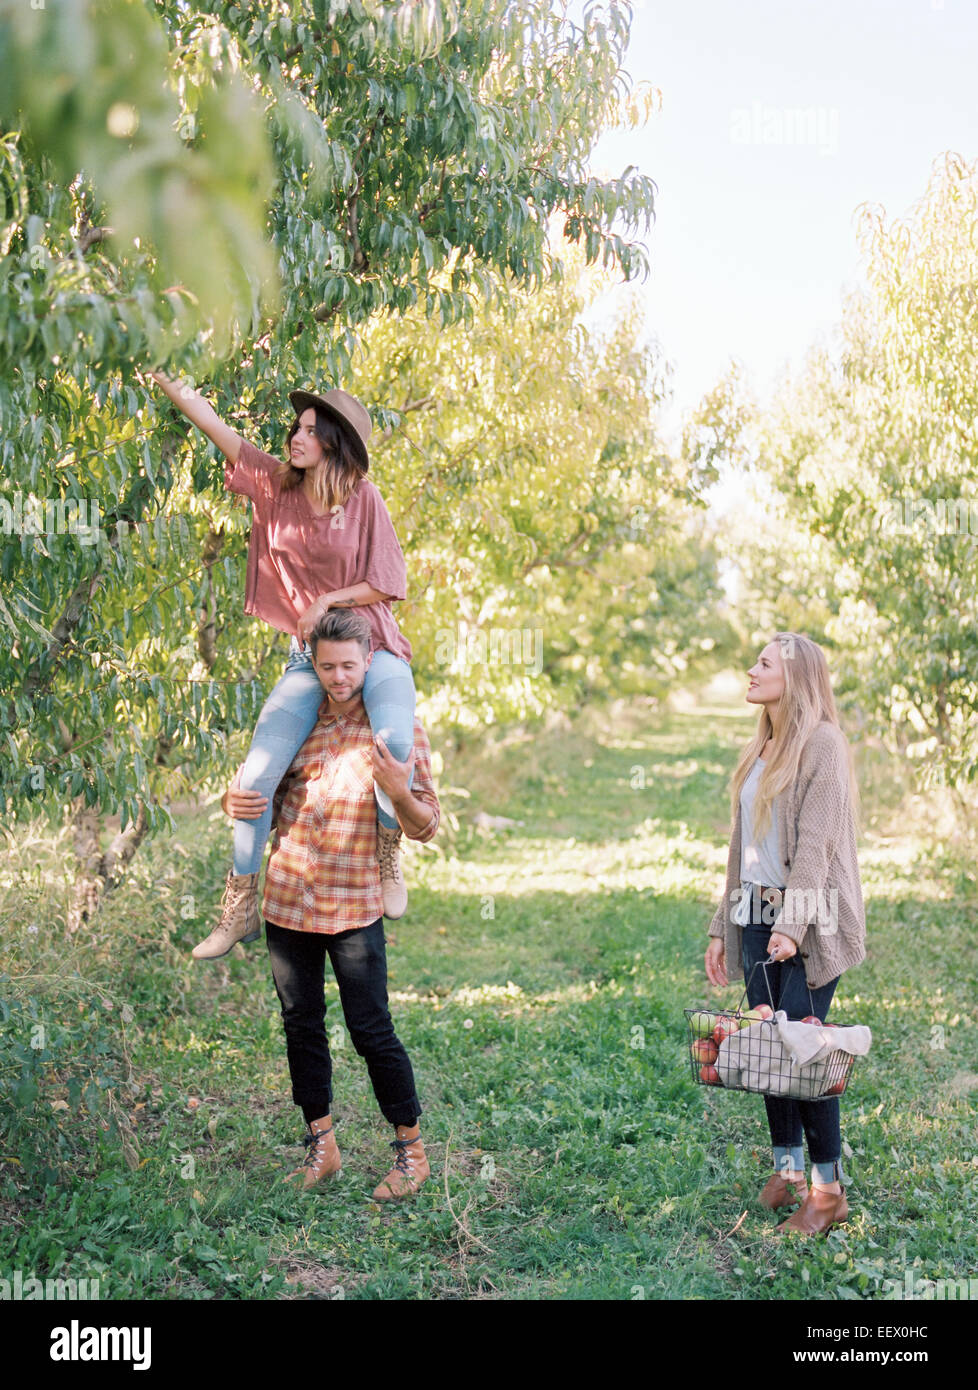 Orchard. Three people picking apples from a tree. Stock Photo